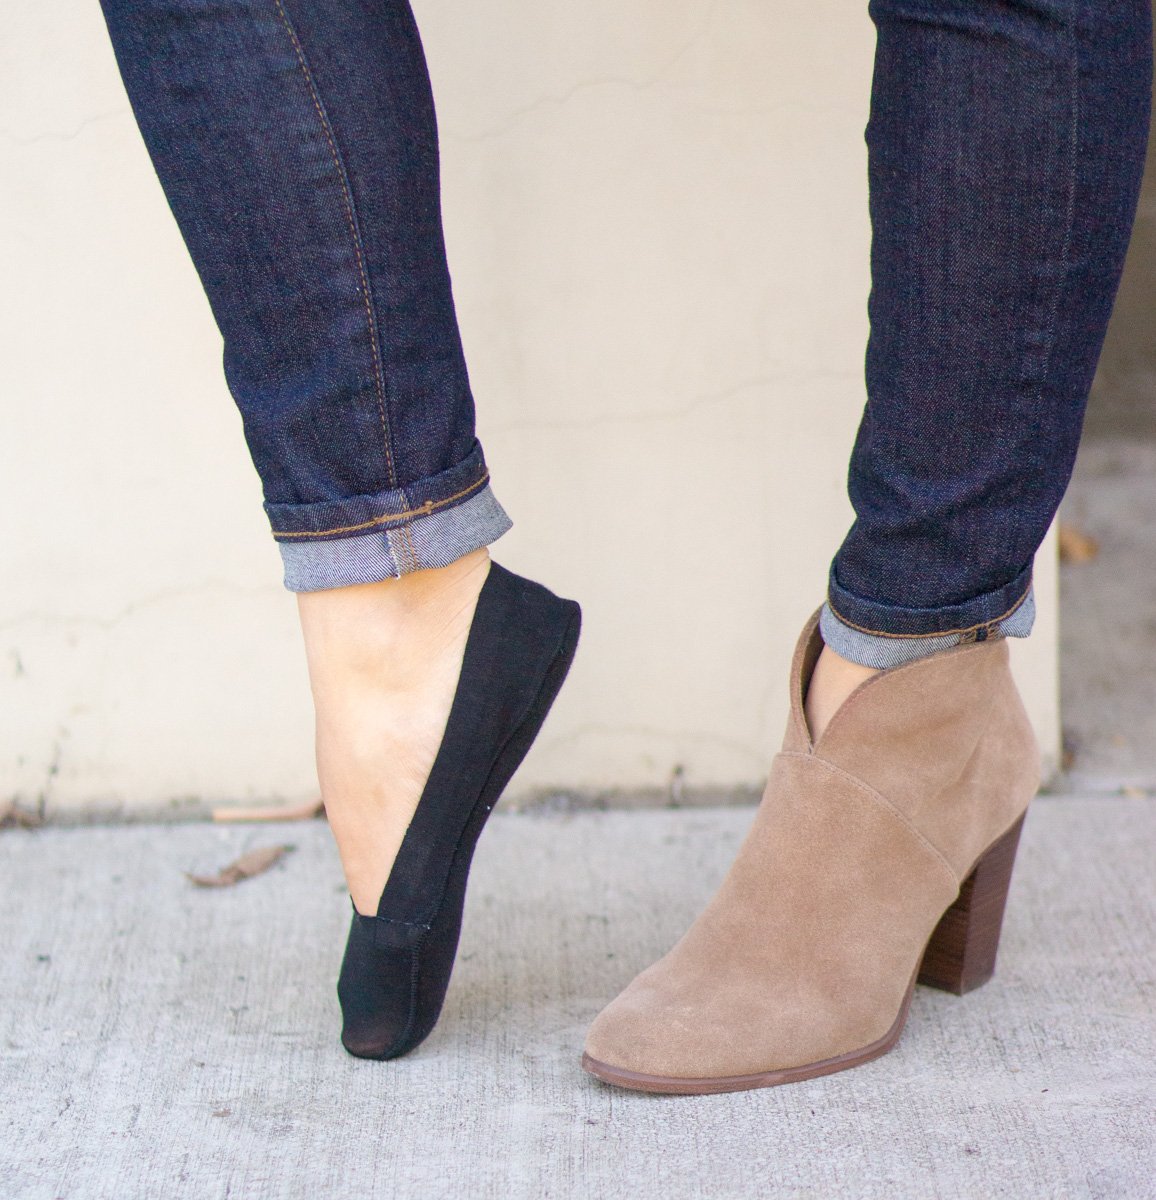 Best Socks for Ankle Booties, Ballet 